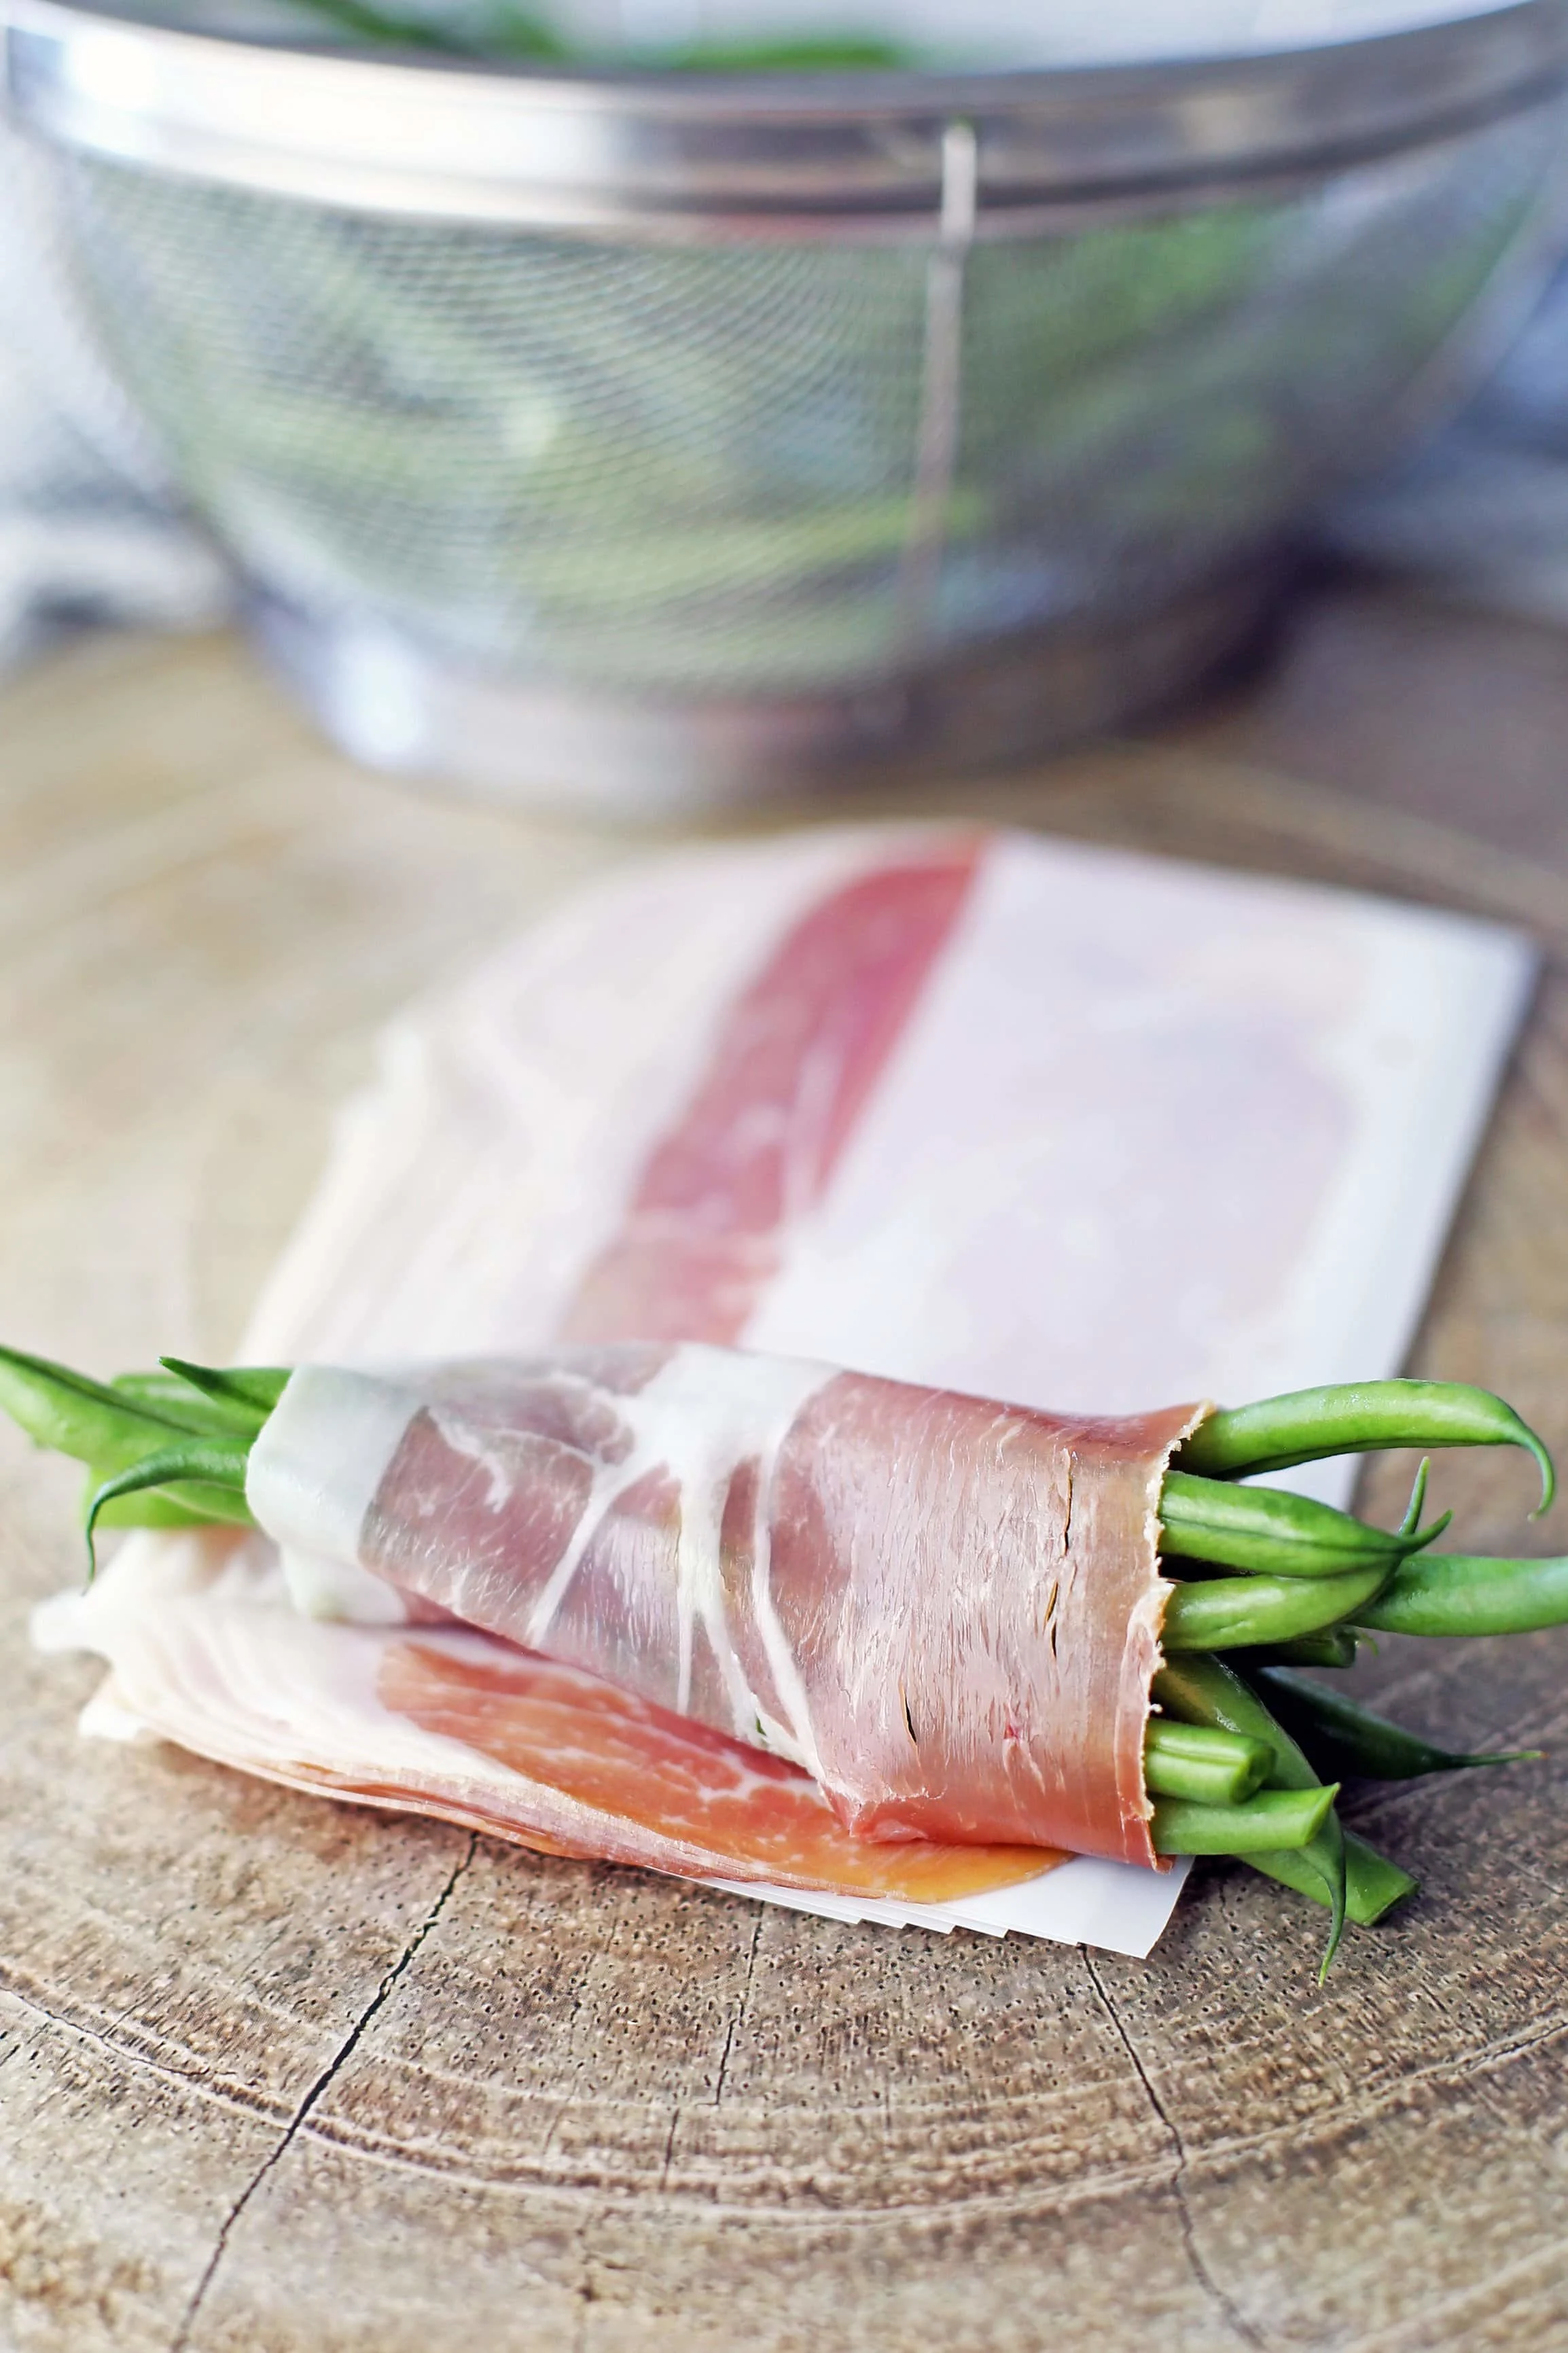 Ten French green beans wrapped in a single slice of prosciutto on a wooden board.